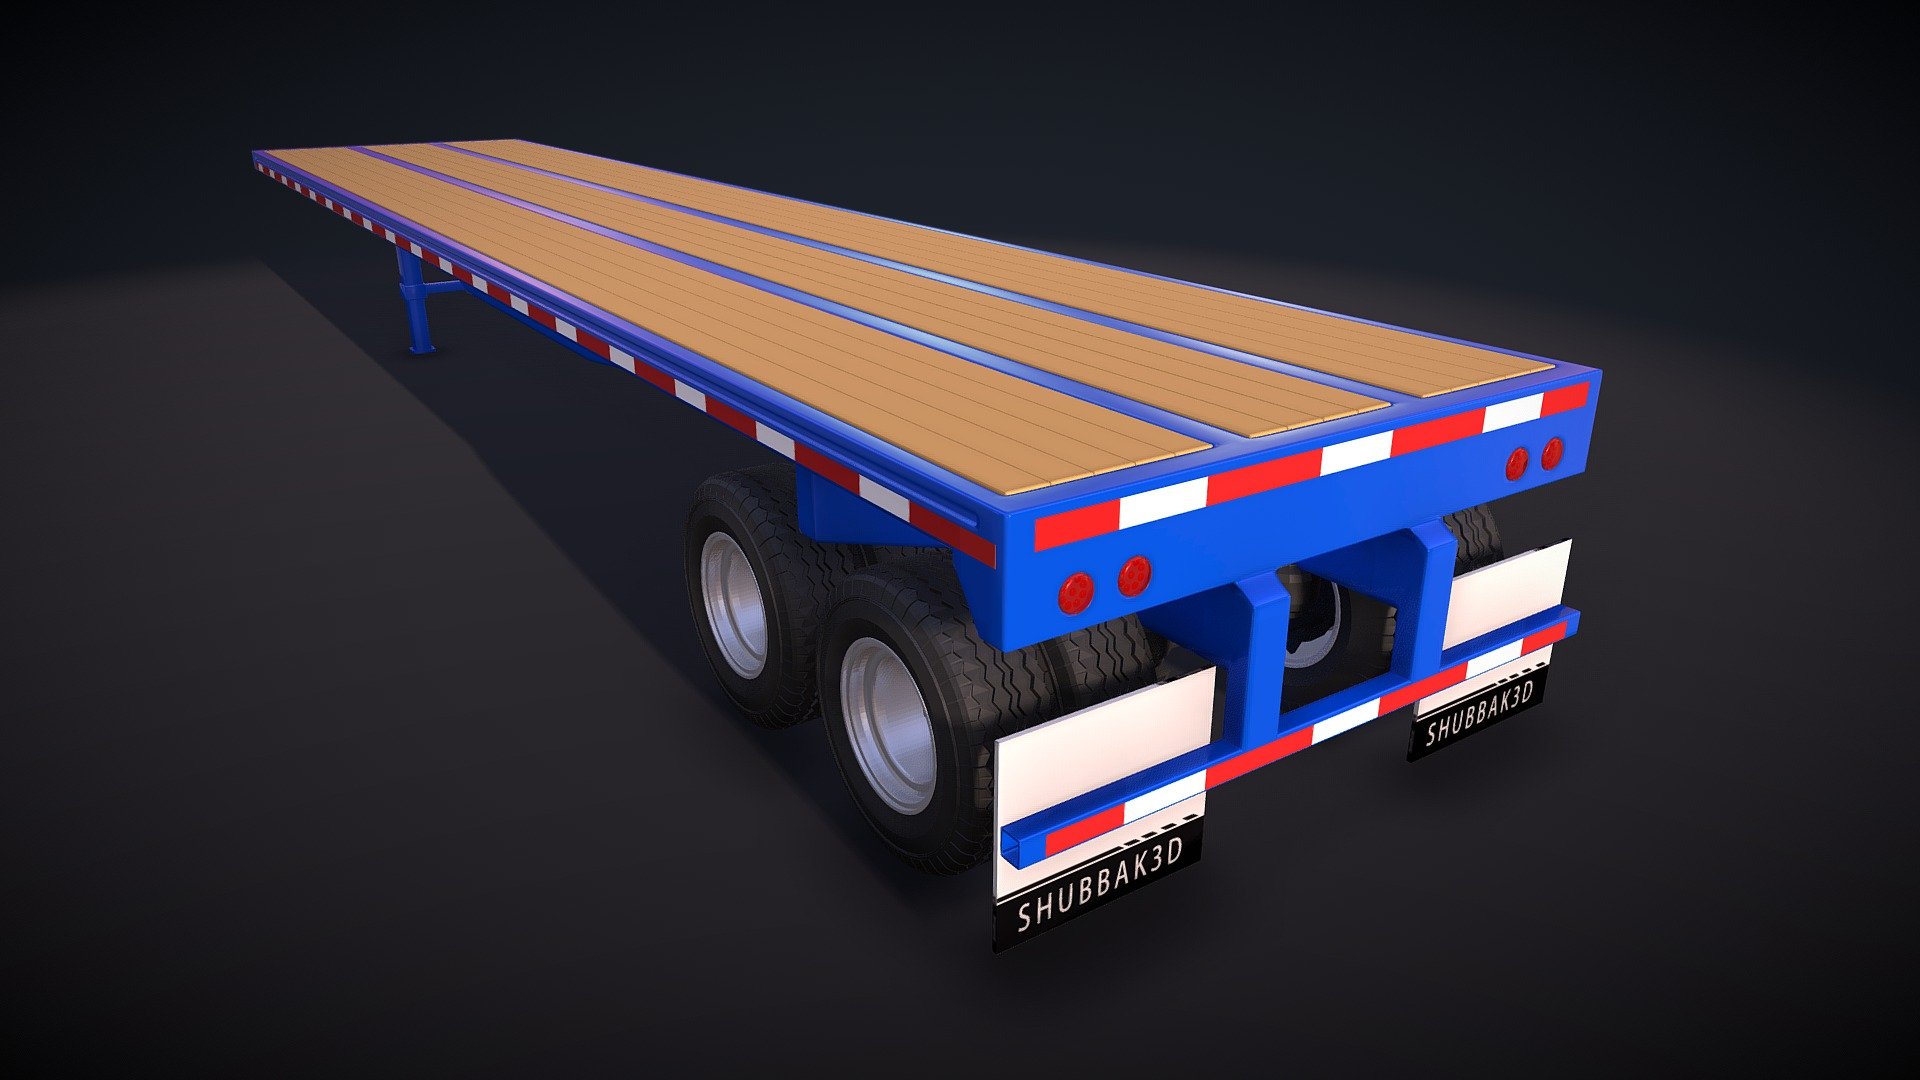 Flatbed Trailer Model Created In 3DS Max 2012.

All Formats Size: 173 MB

Zip File Size: 72.1 MB

Available Formats: .MAX 2012 Default, .MAX 2012 Vray, .FBX, .OBJ+.MTL, .DWG, .STL,

(Polys Count: 270394) (Verts count: 297536) - Flatbed Trailer - Buy Royalty Free 3D model by SHUBBAK3D 3d model